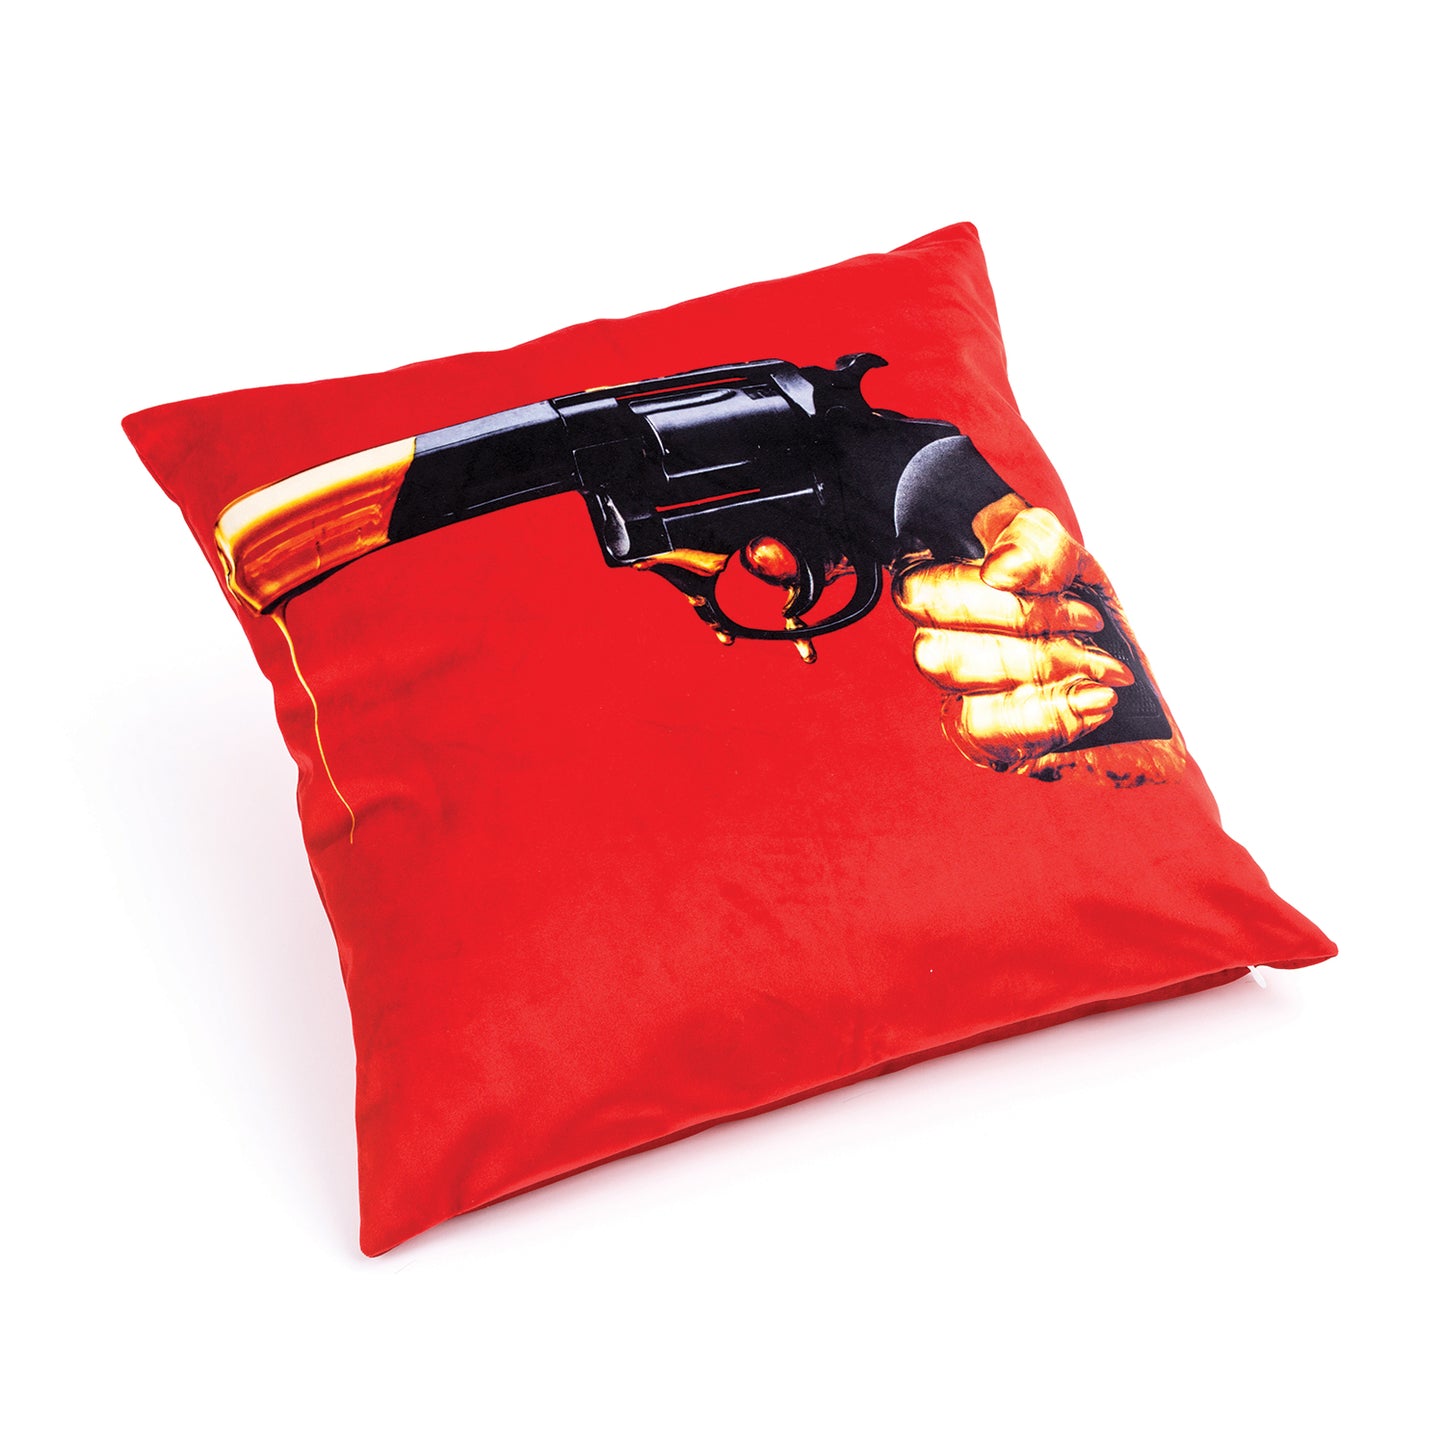 Revolver Cushion Cover - Red